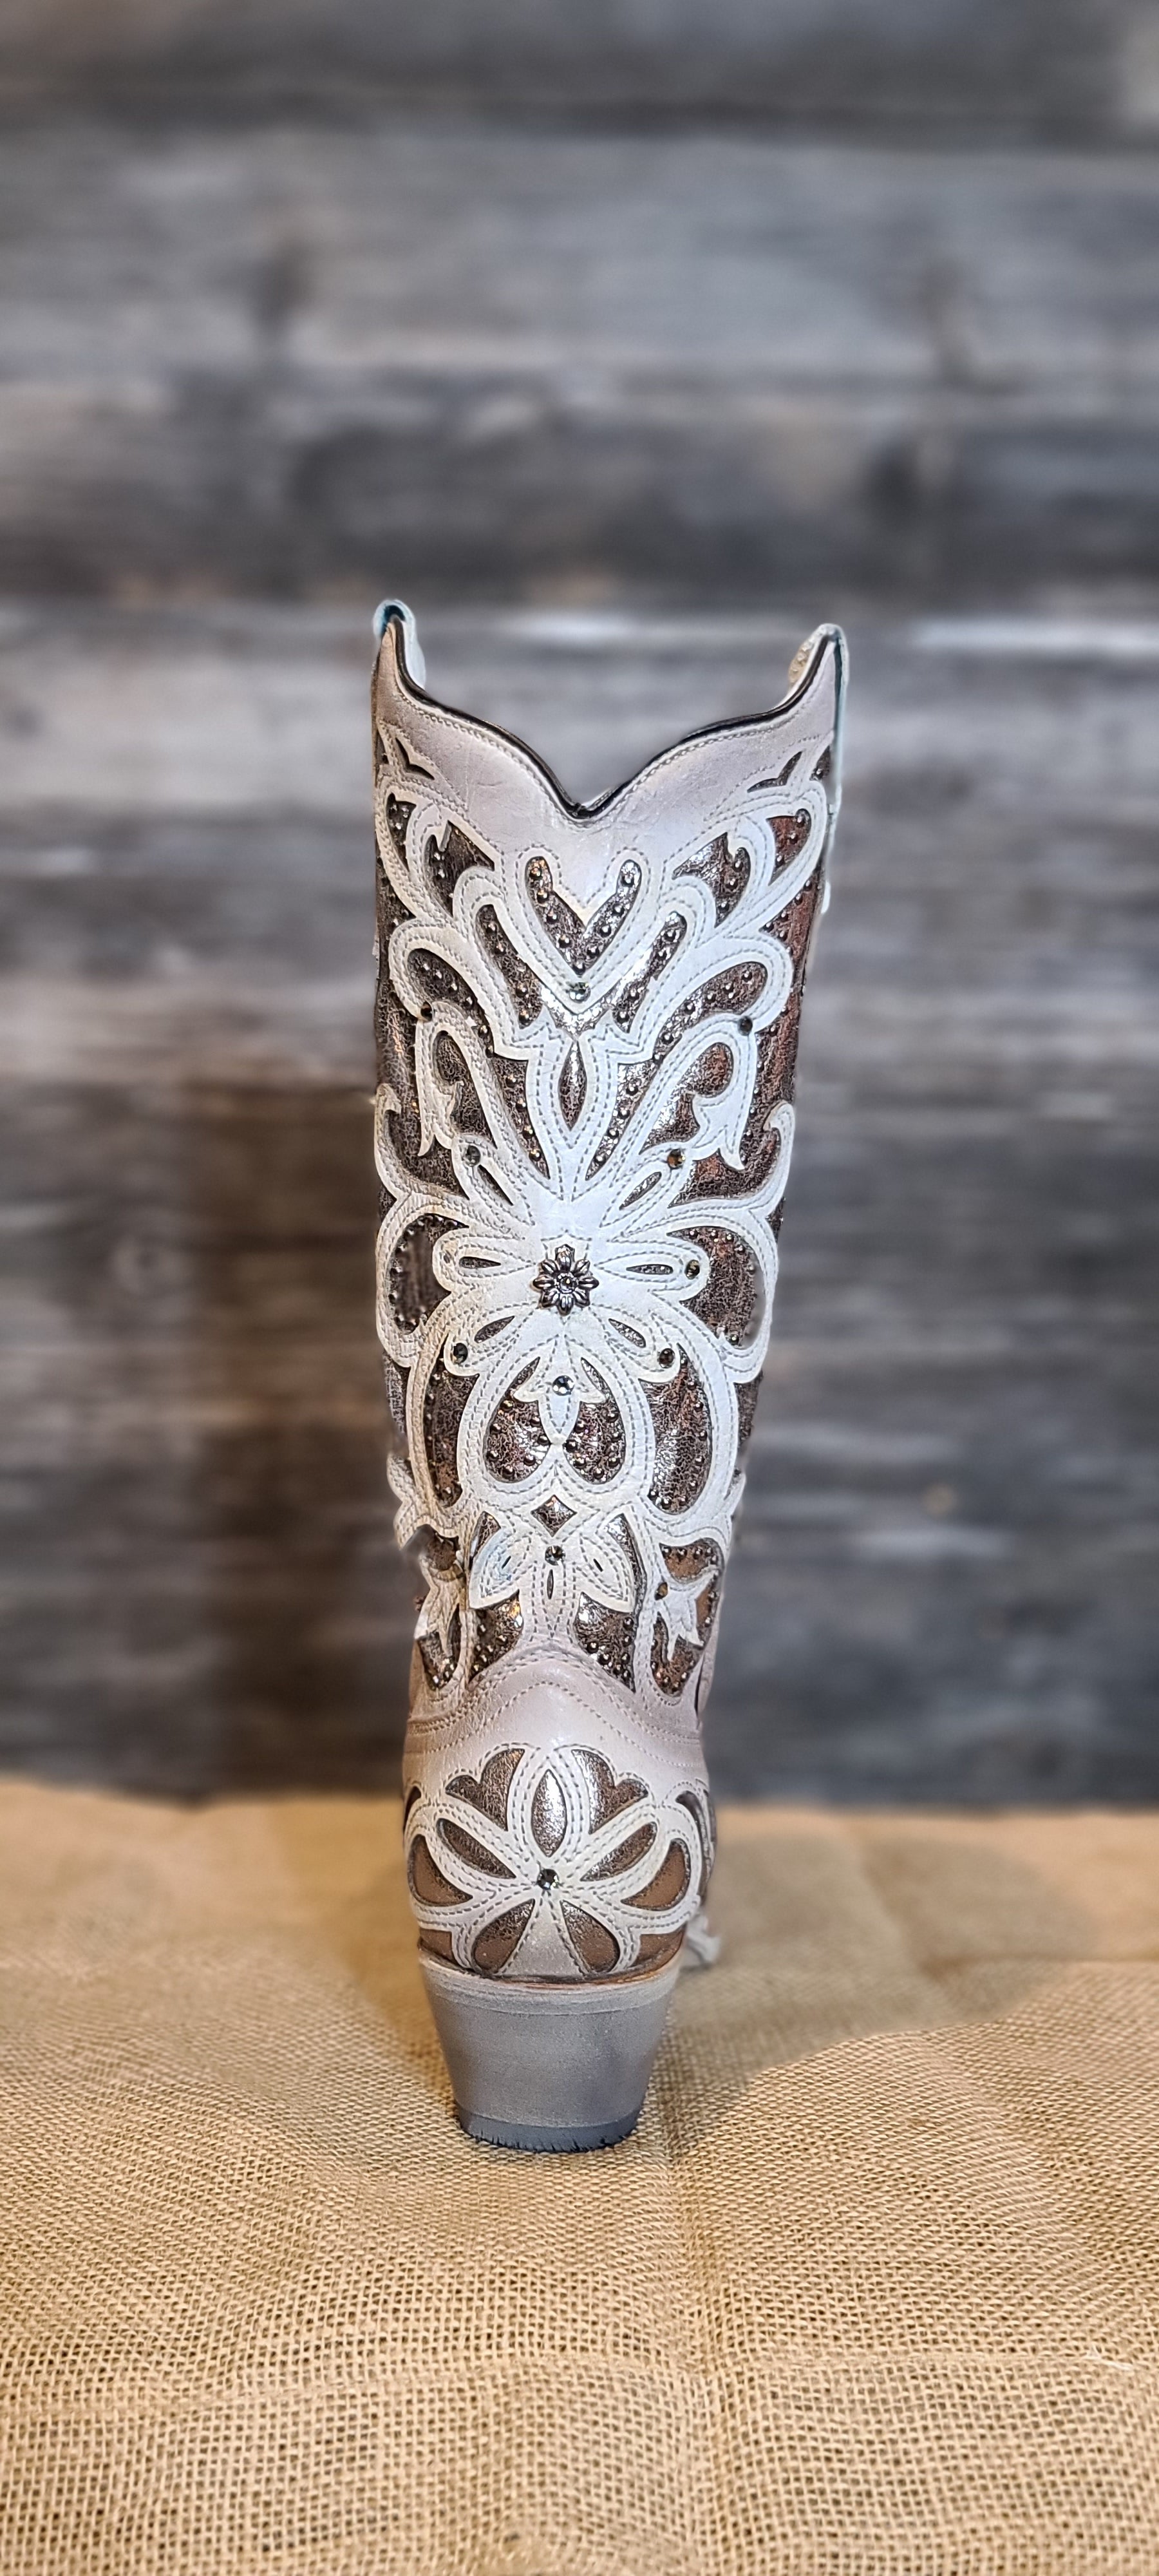 Corral Ladies White, Oxford Inlay, Crystals & Embroidery Boots E1593